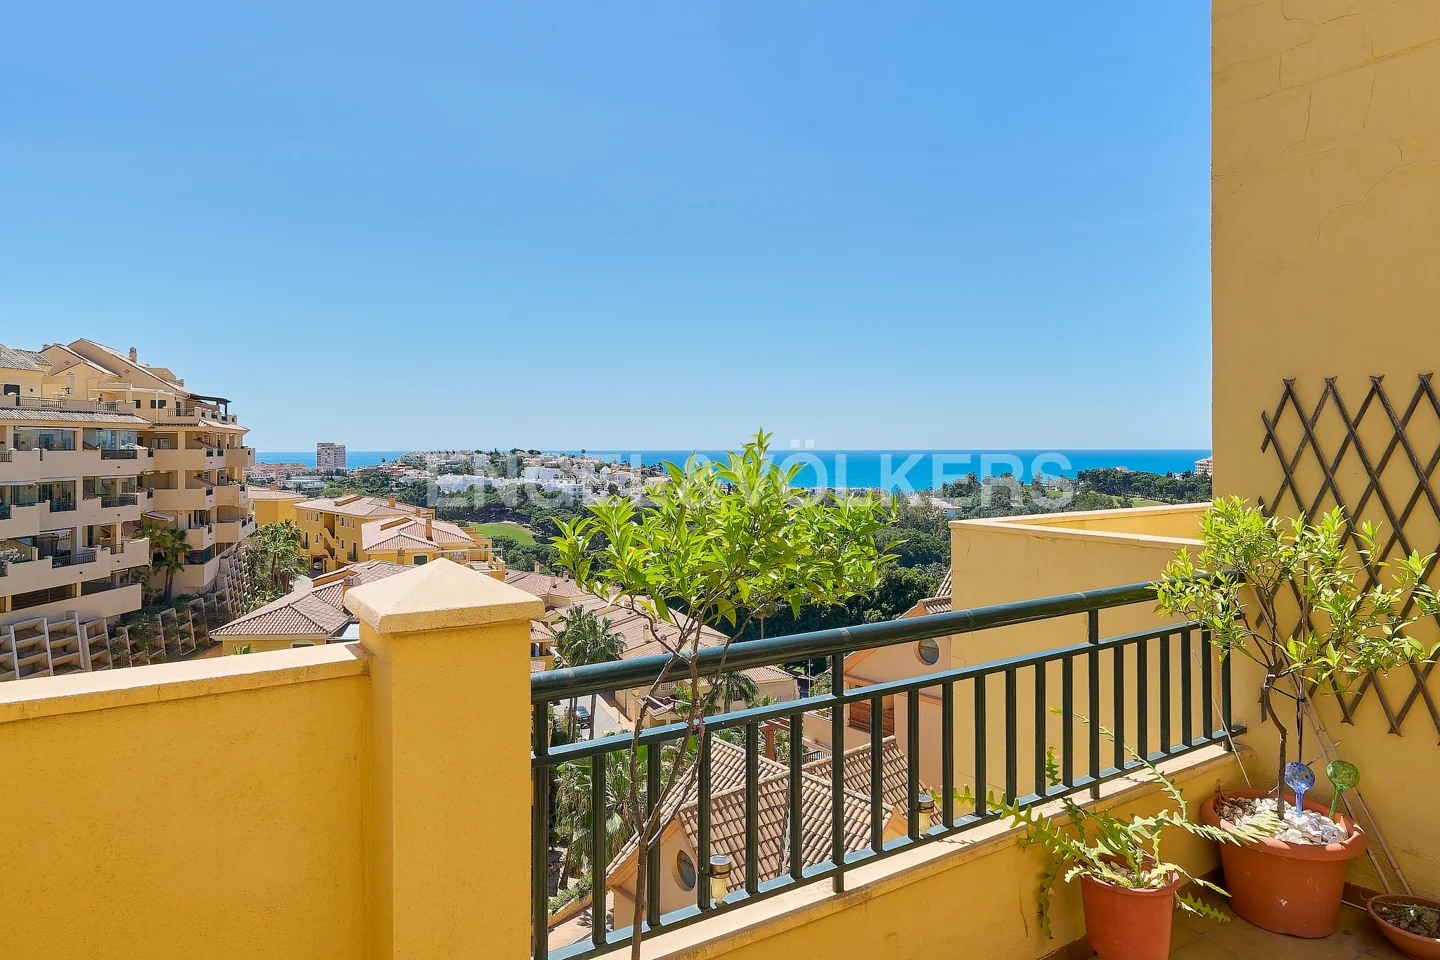 2-bedroom apartment with sea views close to golf course